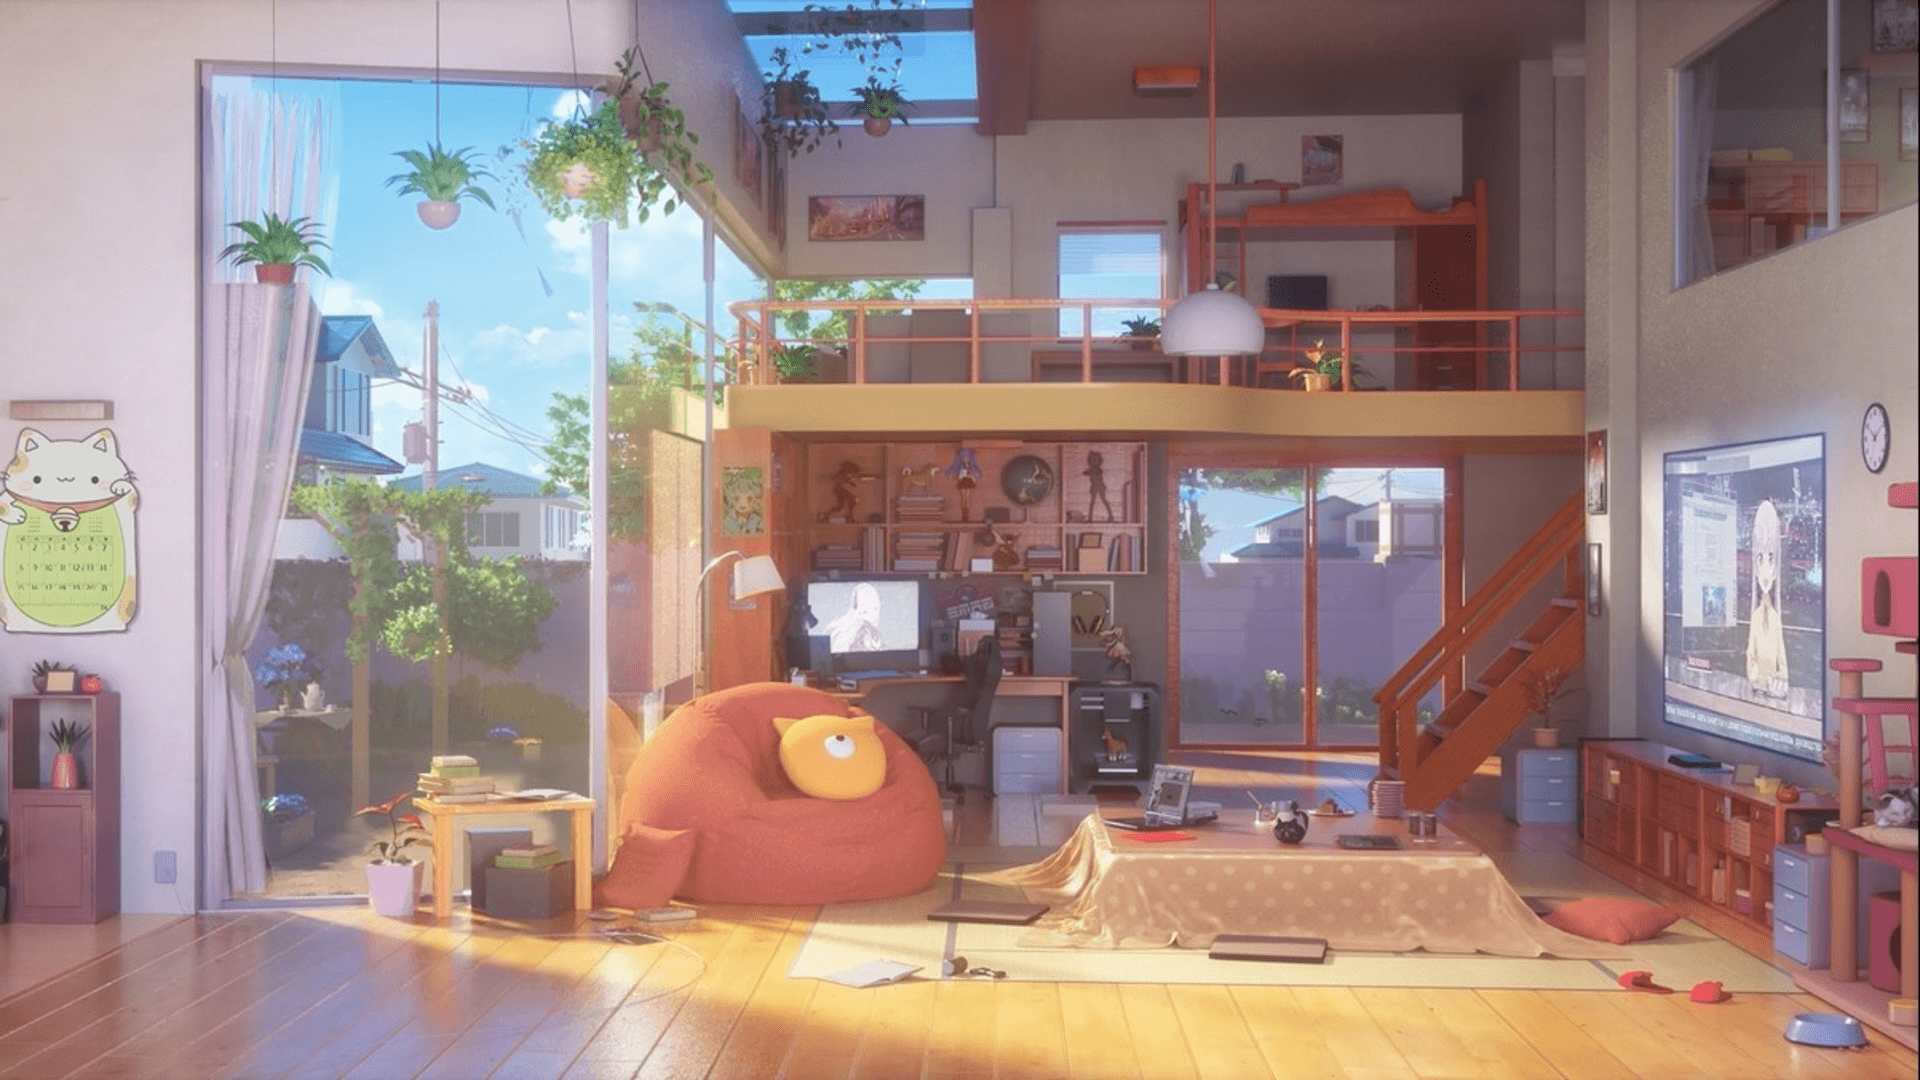 Anime Apartment Wallpapers Top Free Anime Apartment Backgrounds Wallpaperaccess Scenery background living room background animation background episode interactive backgrounds episode backgrounds casa anime anime places anime scenery wallpaper digital art girl. anime apartment wallpapers top free